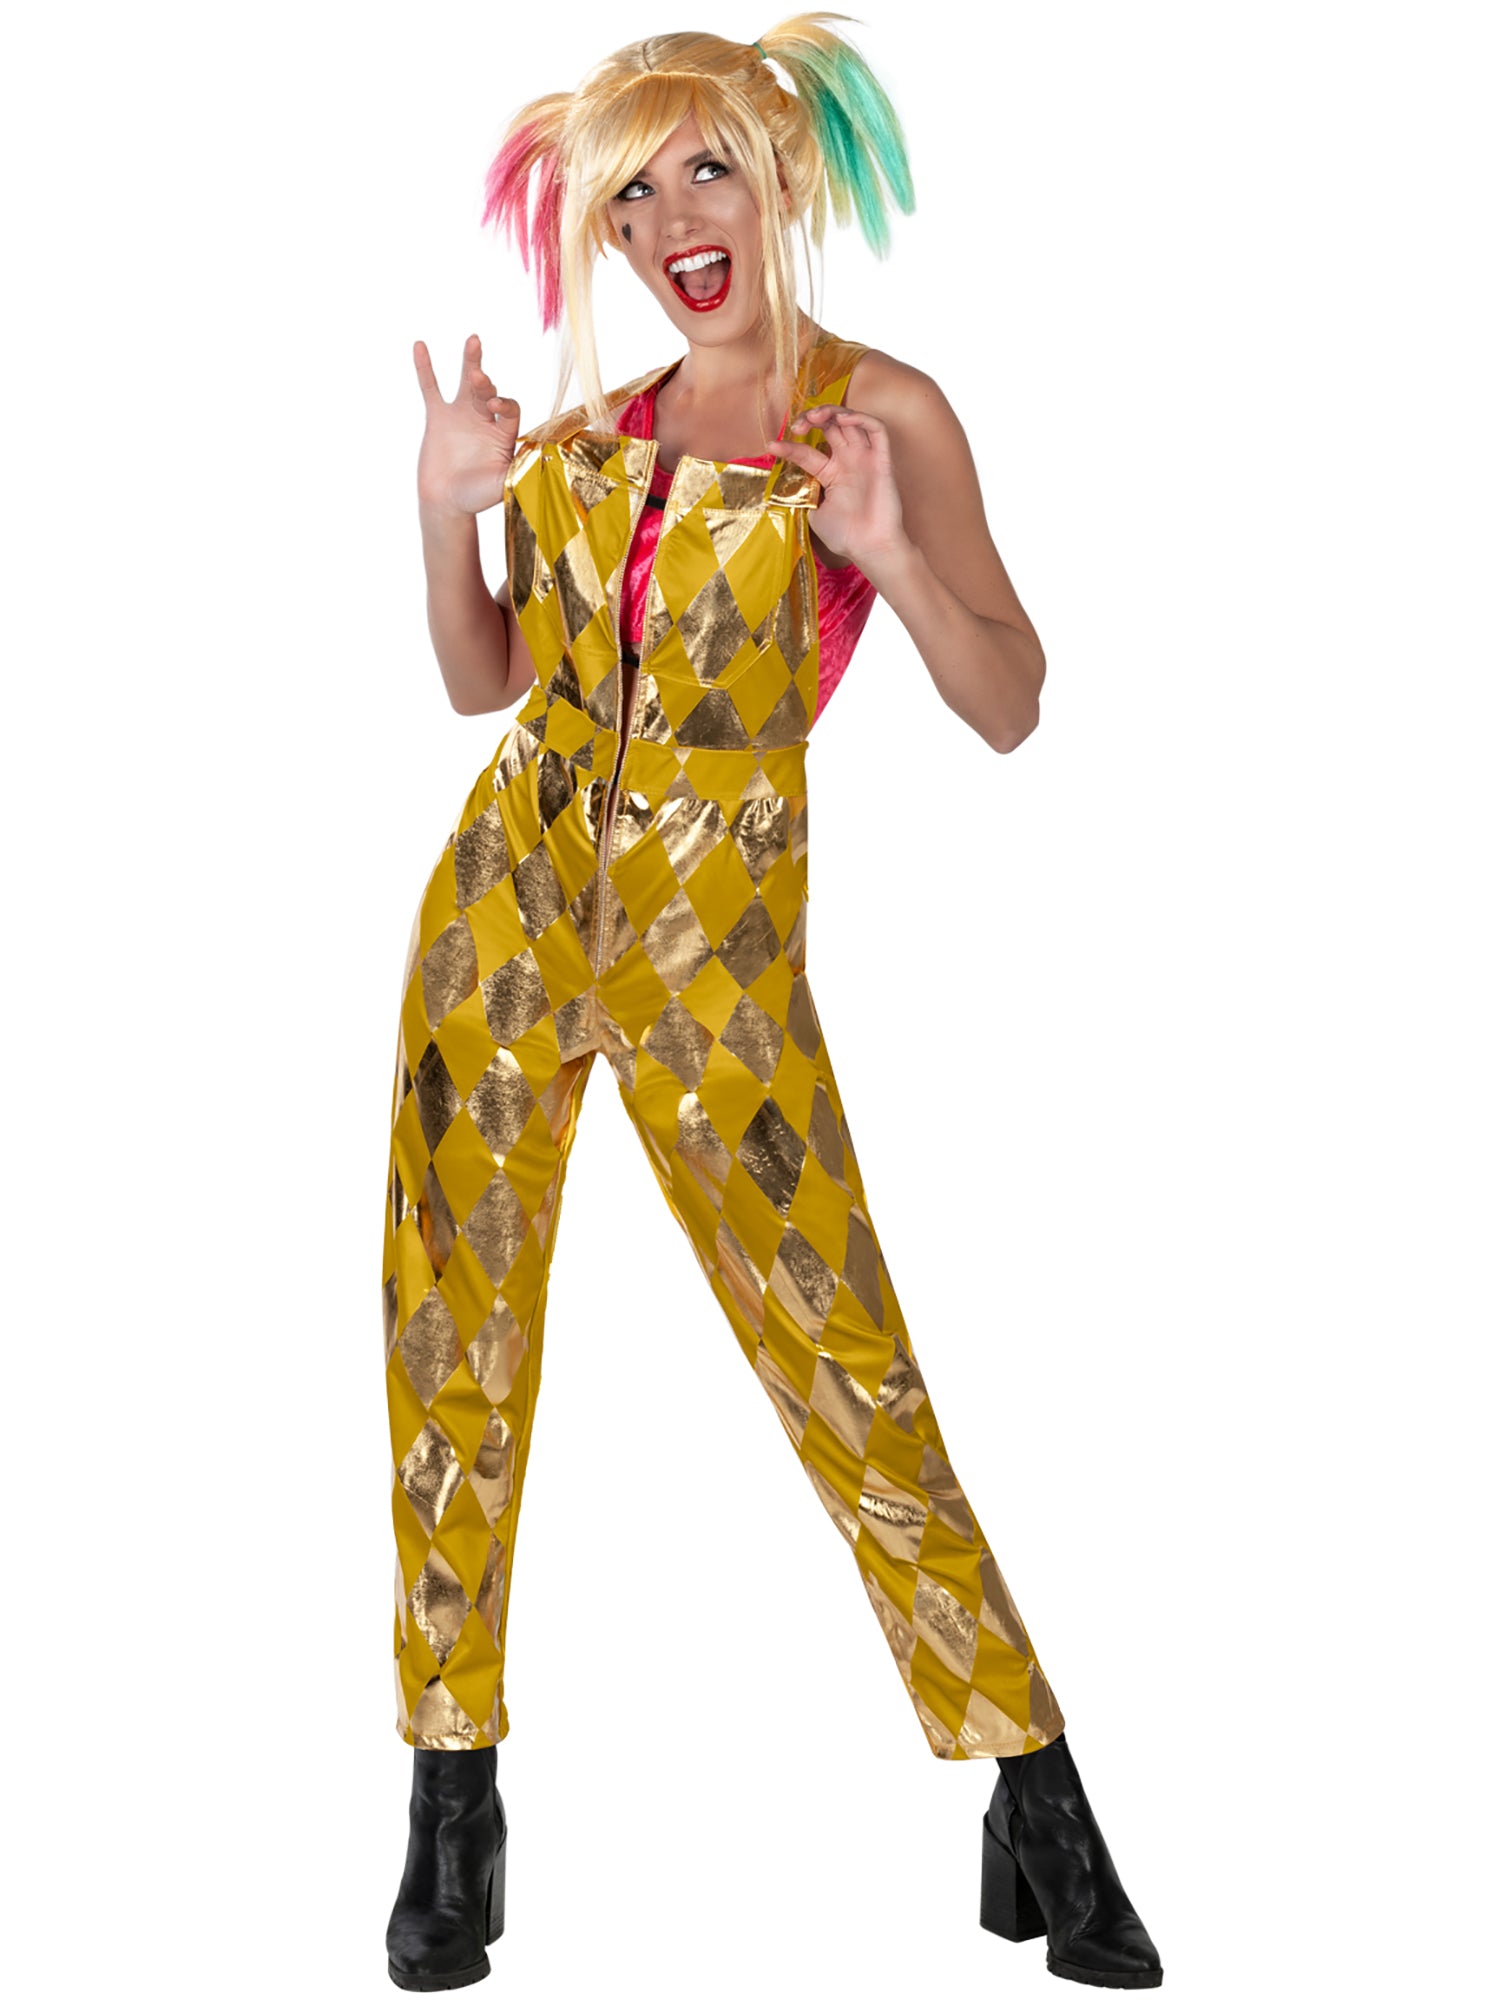 Harley Quinn, Birds Of Prey, Suicide Squad, Birds Of Prey, Multi, DC, Adult Costume, Extra Small, Front